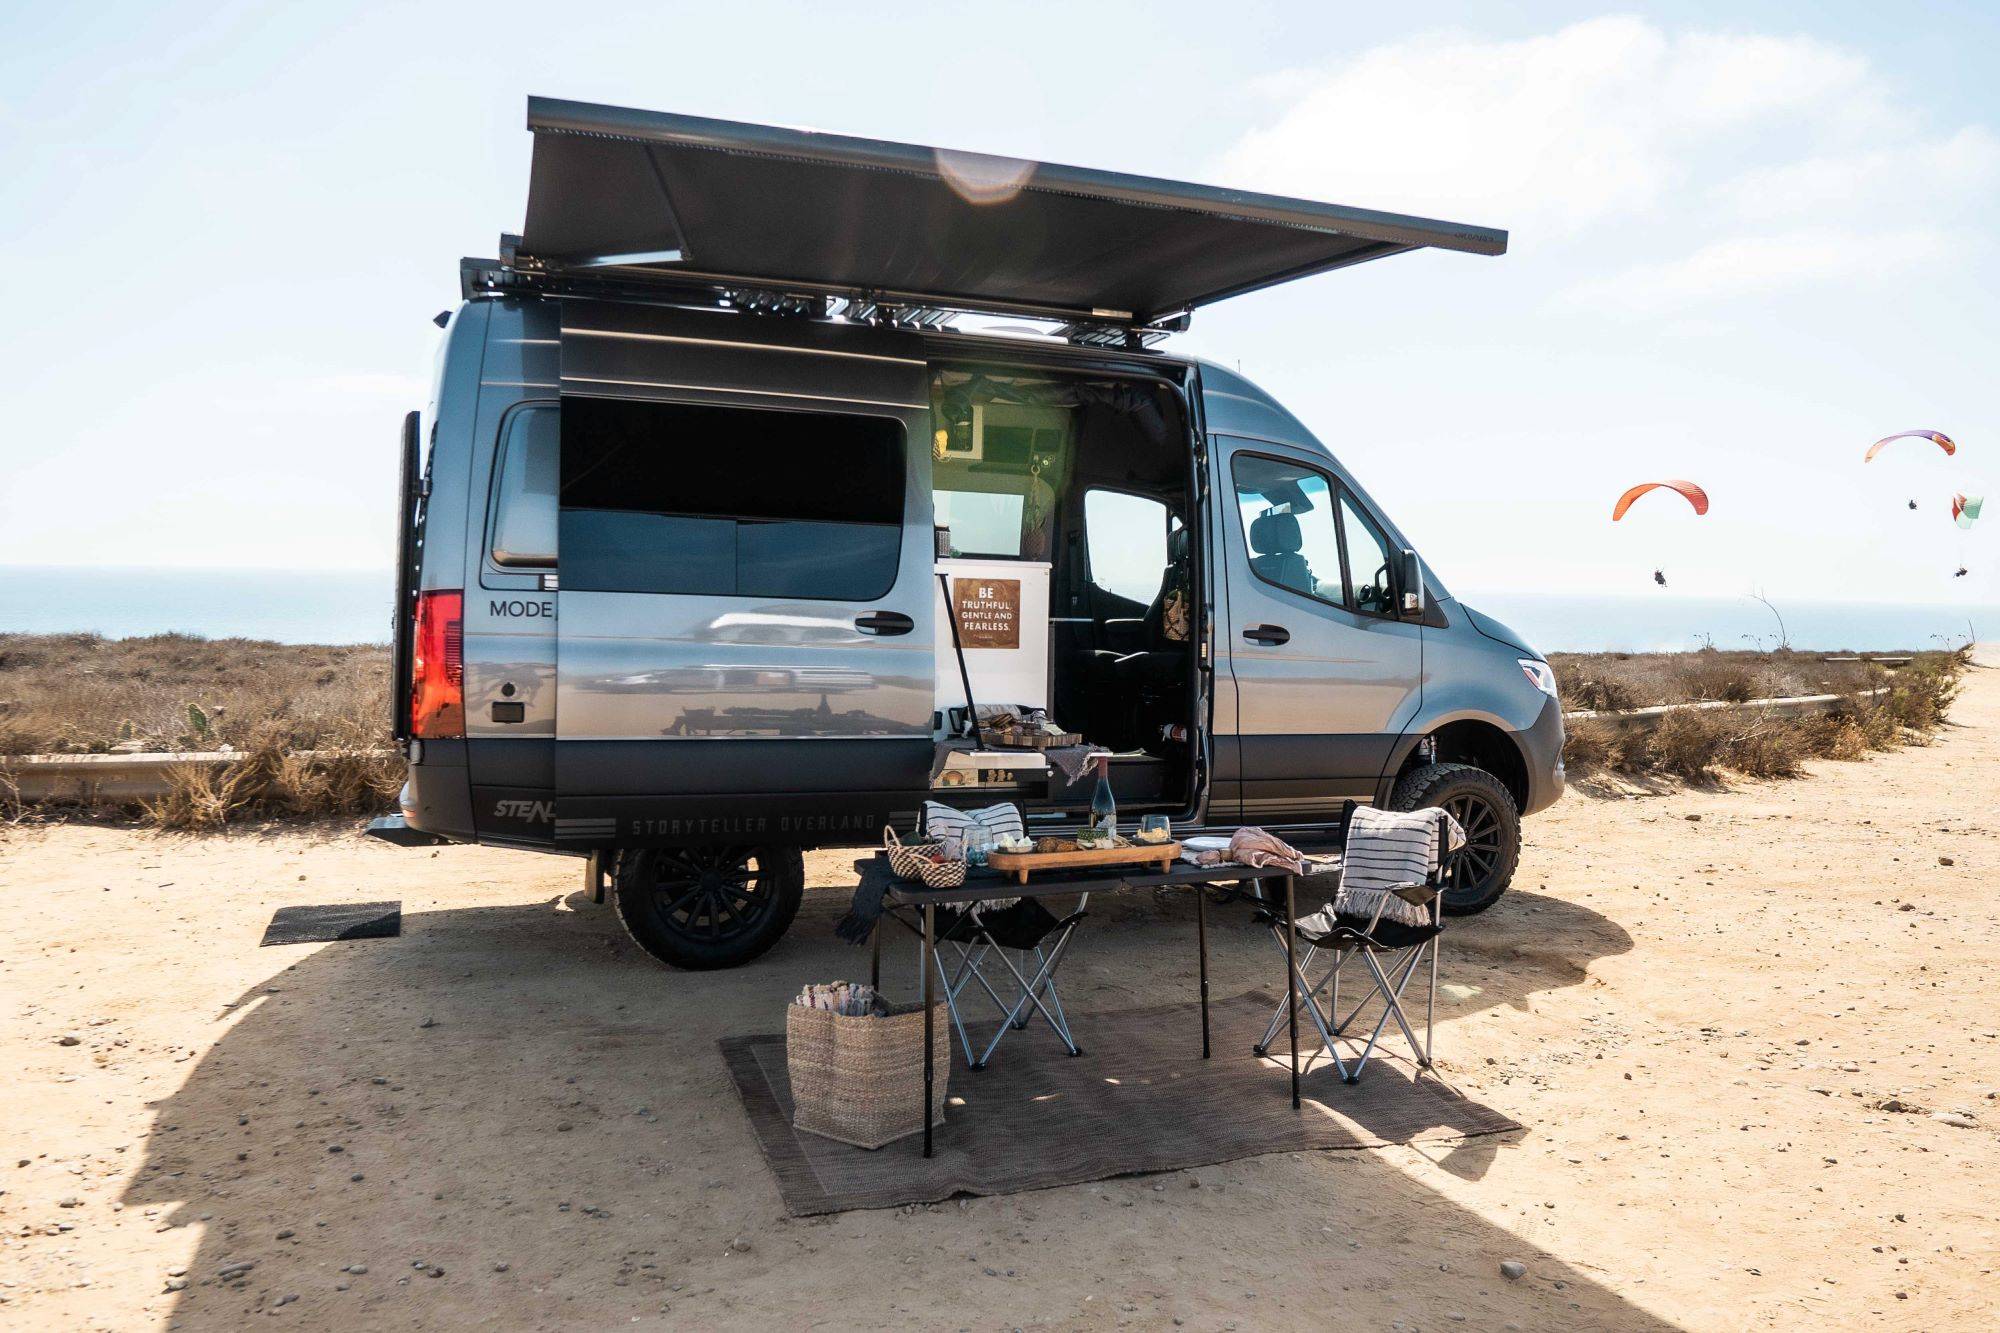 A camper van parked at the beach. Finance your adventure today!